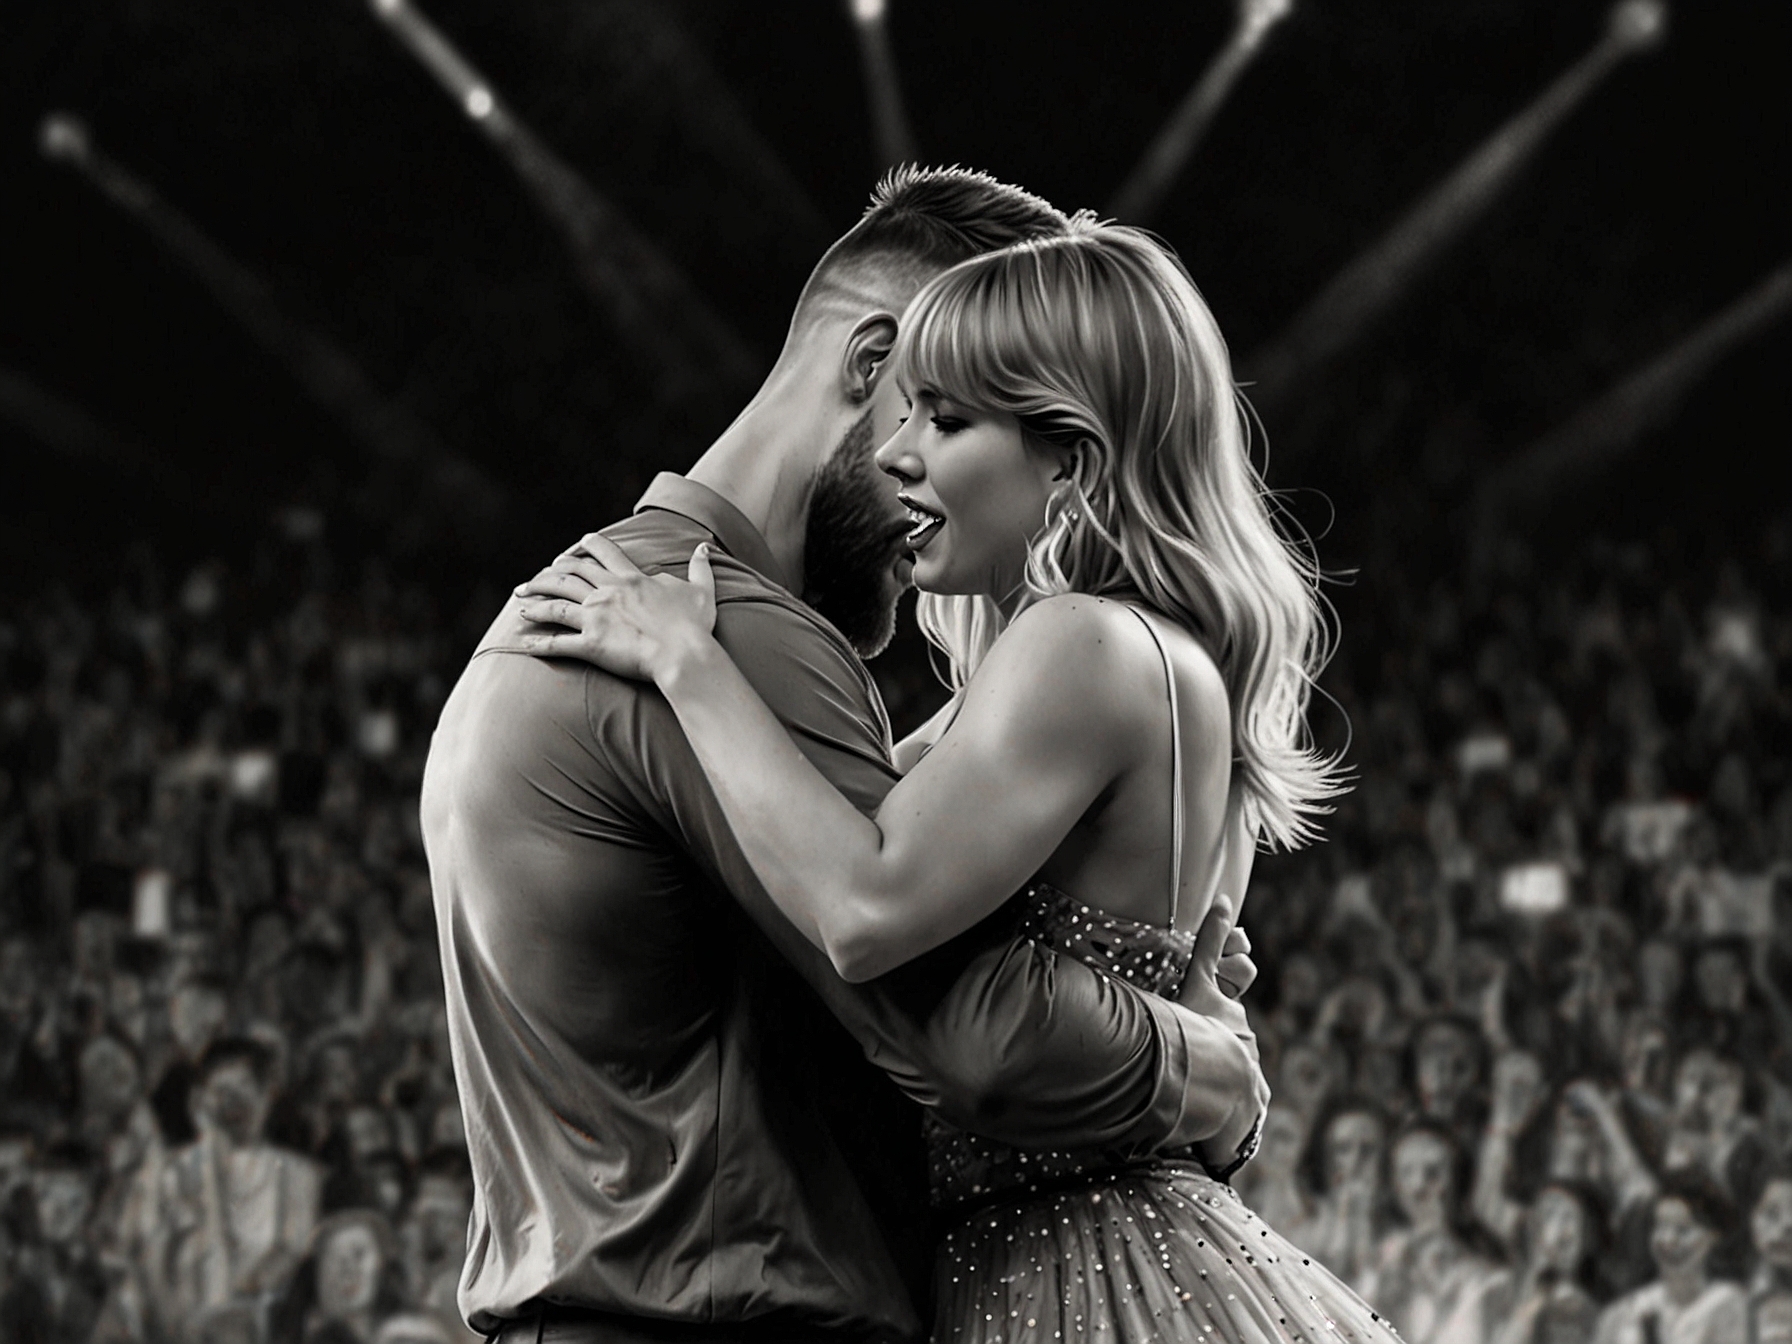 Travis Kelce, in a heartfelt moment, appears on stage during Taylor Swift's performance, surprising the audience and sharing a special moment with Taylor that highlights their strong bond.